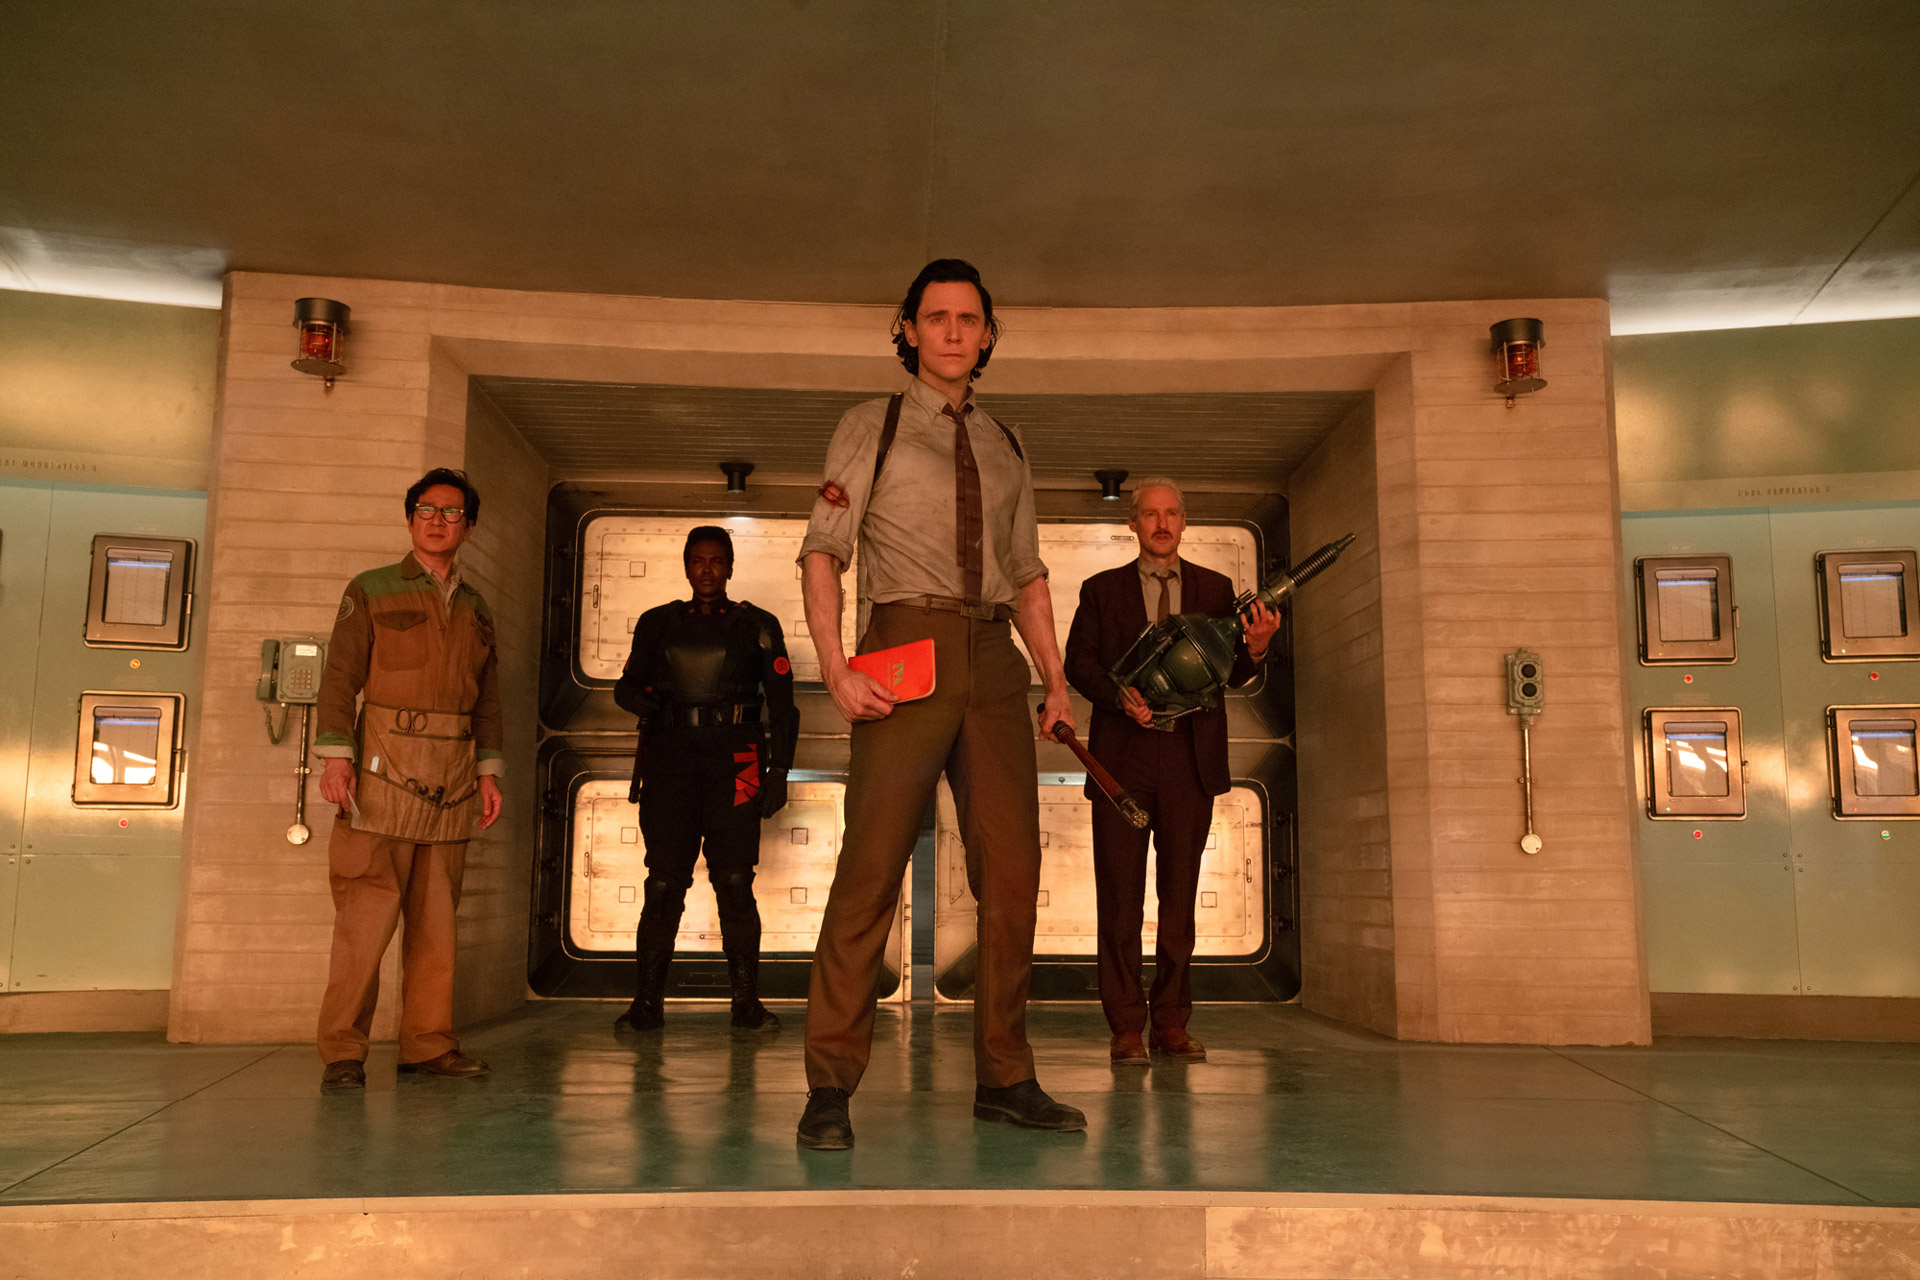 Loki and his friends at the TVA stand in a doorway, looking ahead